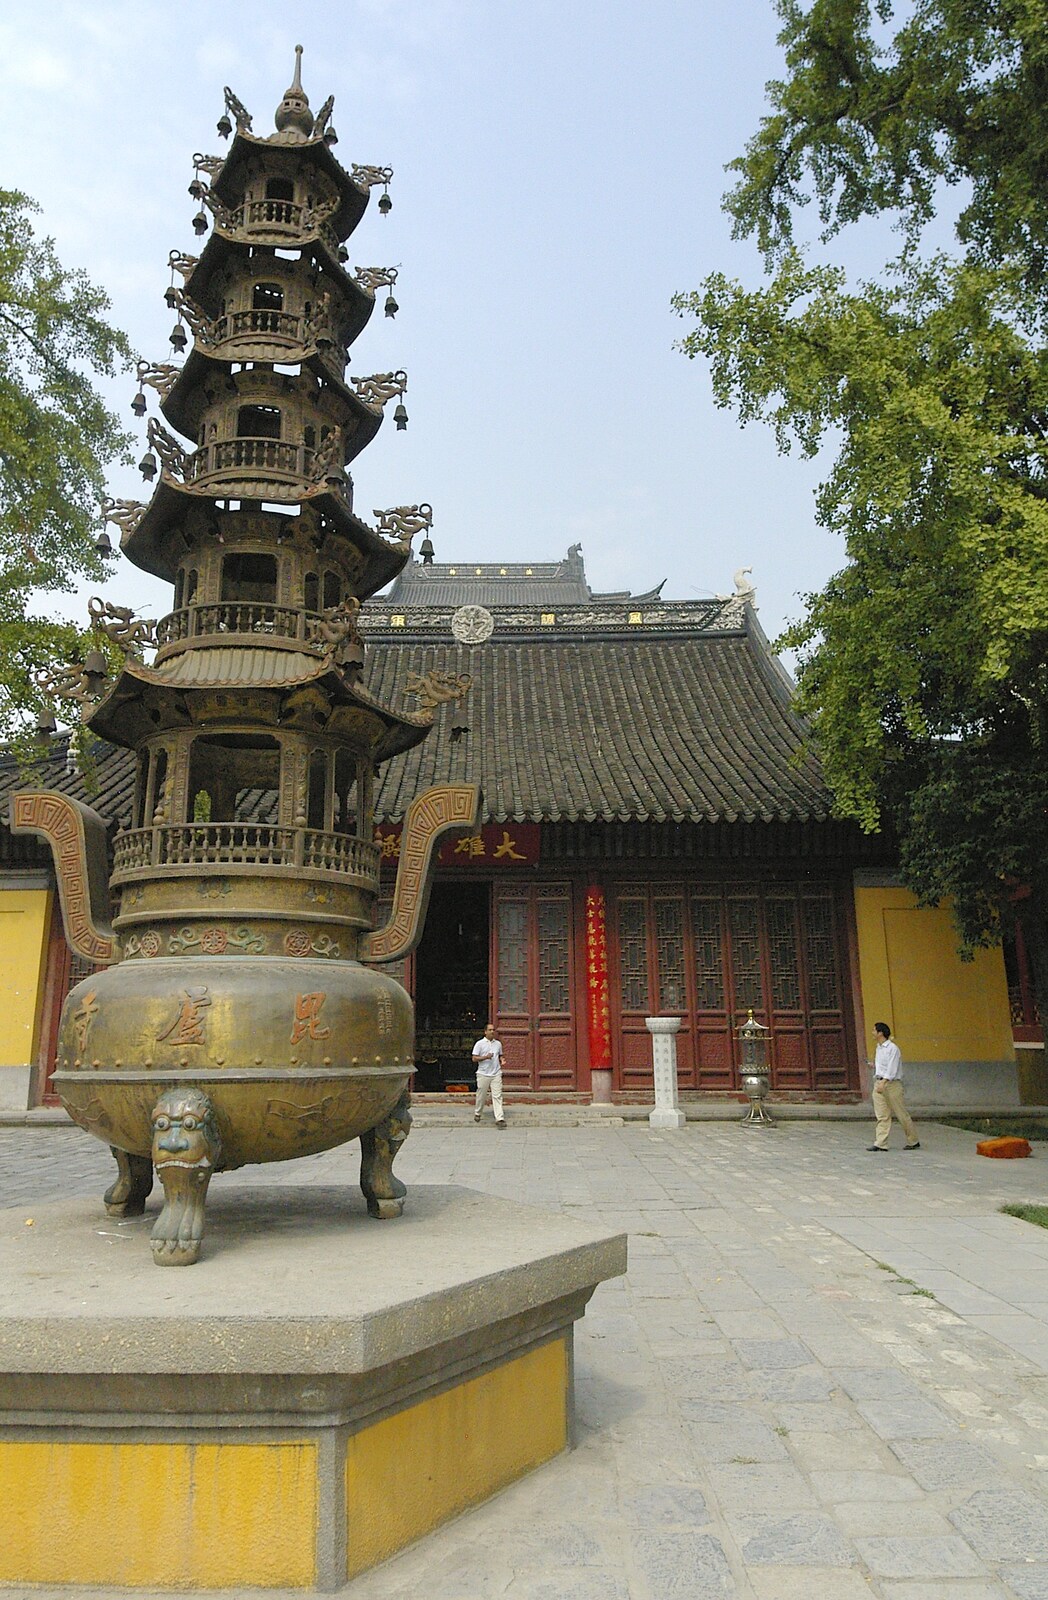 A stacked urn from A Few Days in Nanjing, Jiangsu Province, China - 7th October 2006